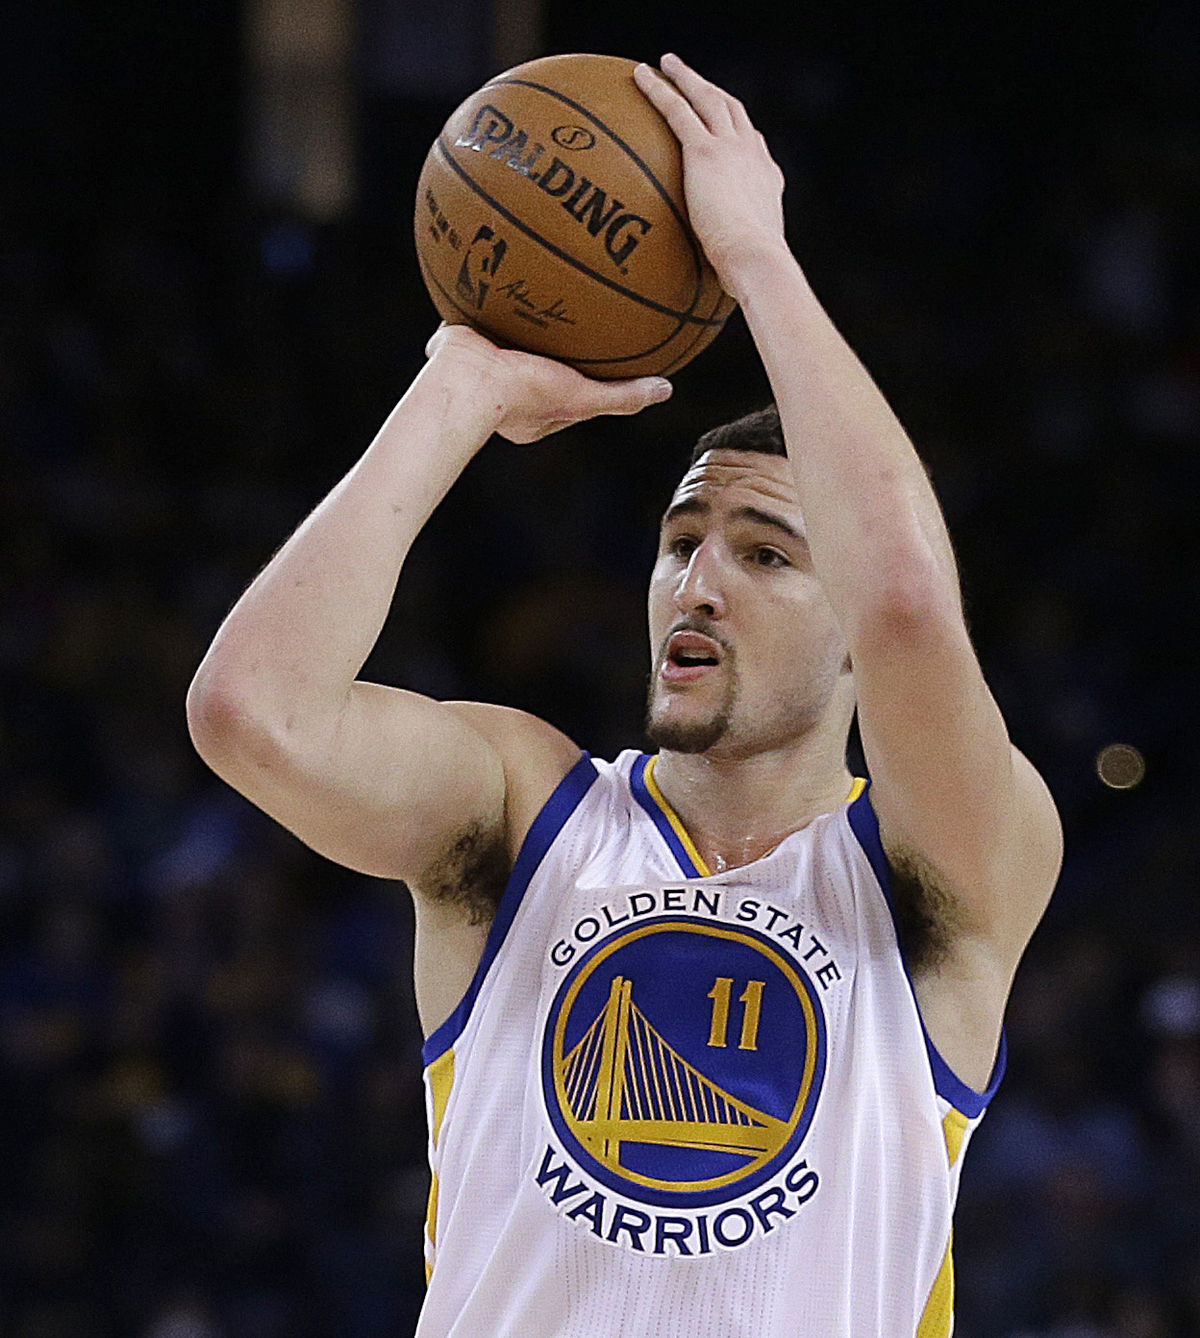 Quotes by Klay Thompson @ Like Success